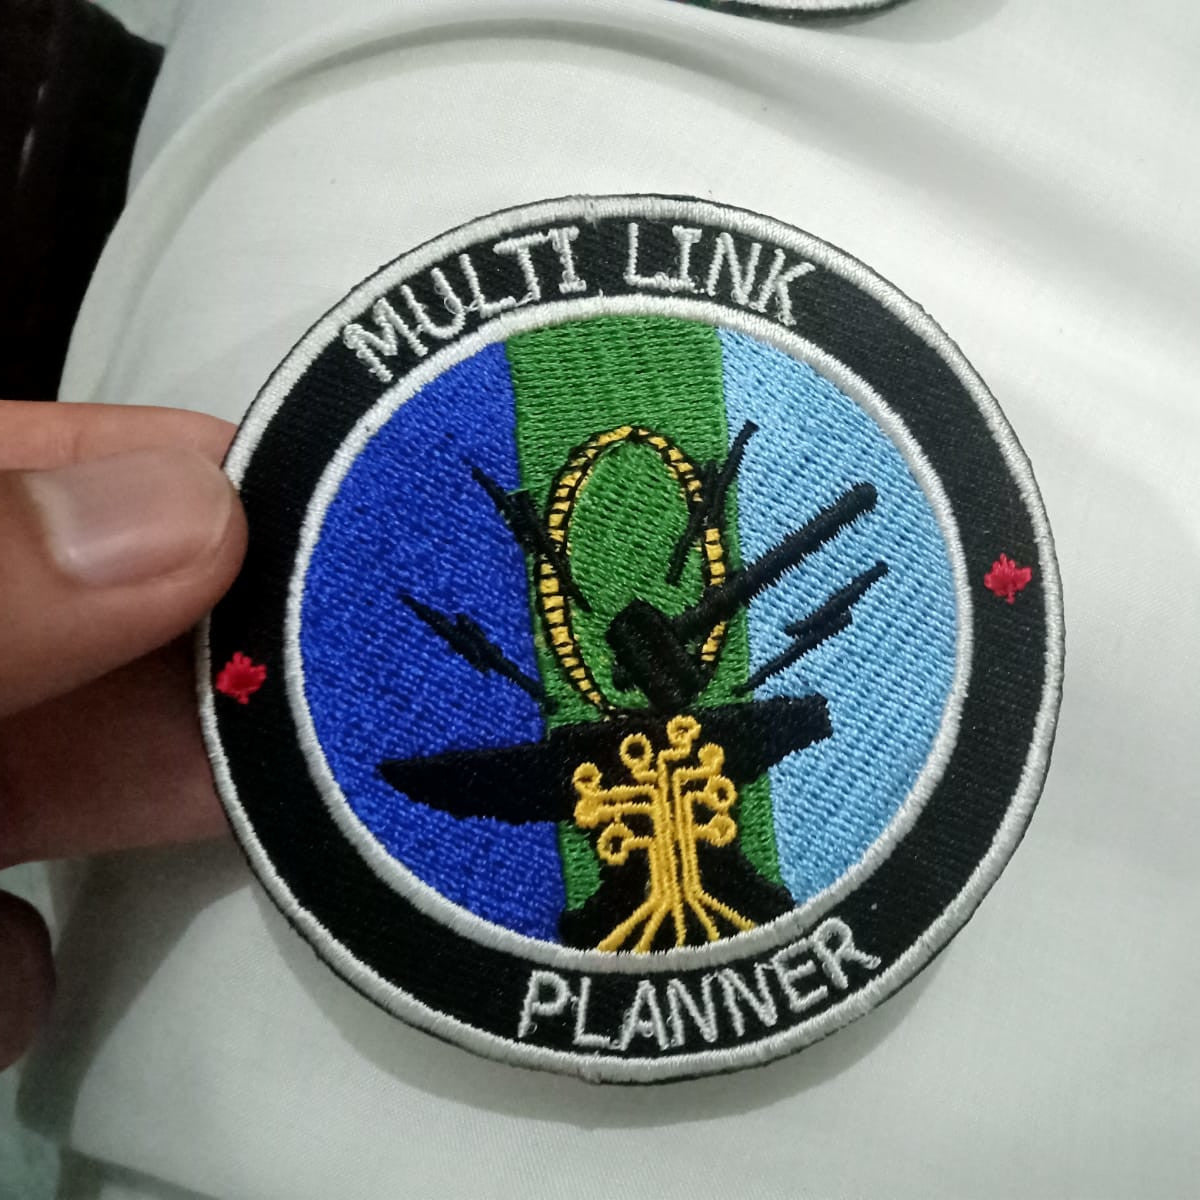 Multi Link Planner Patch